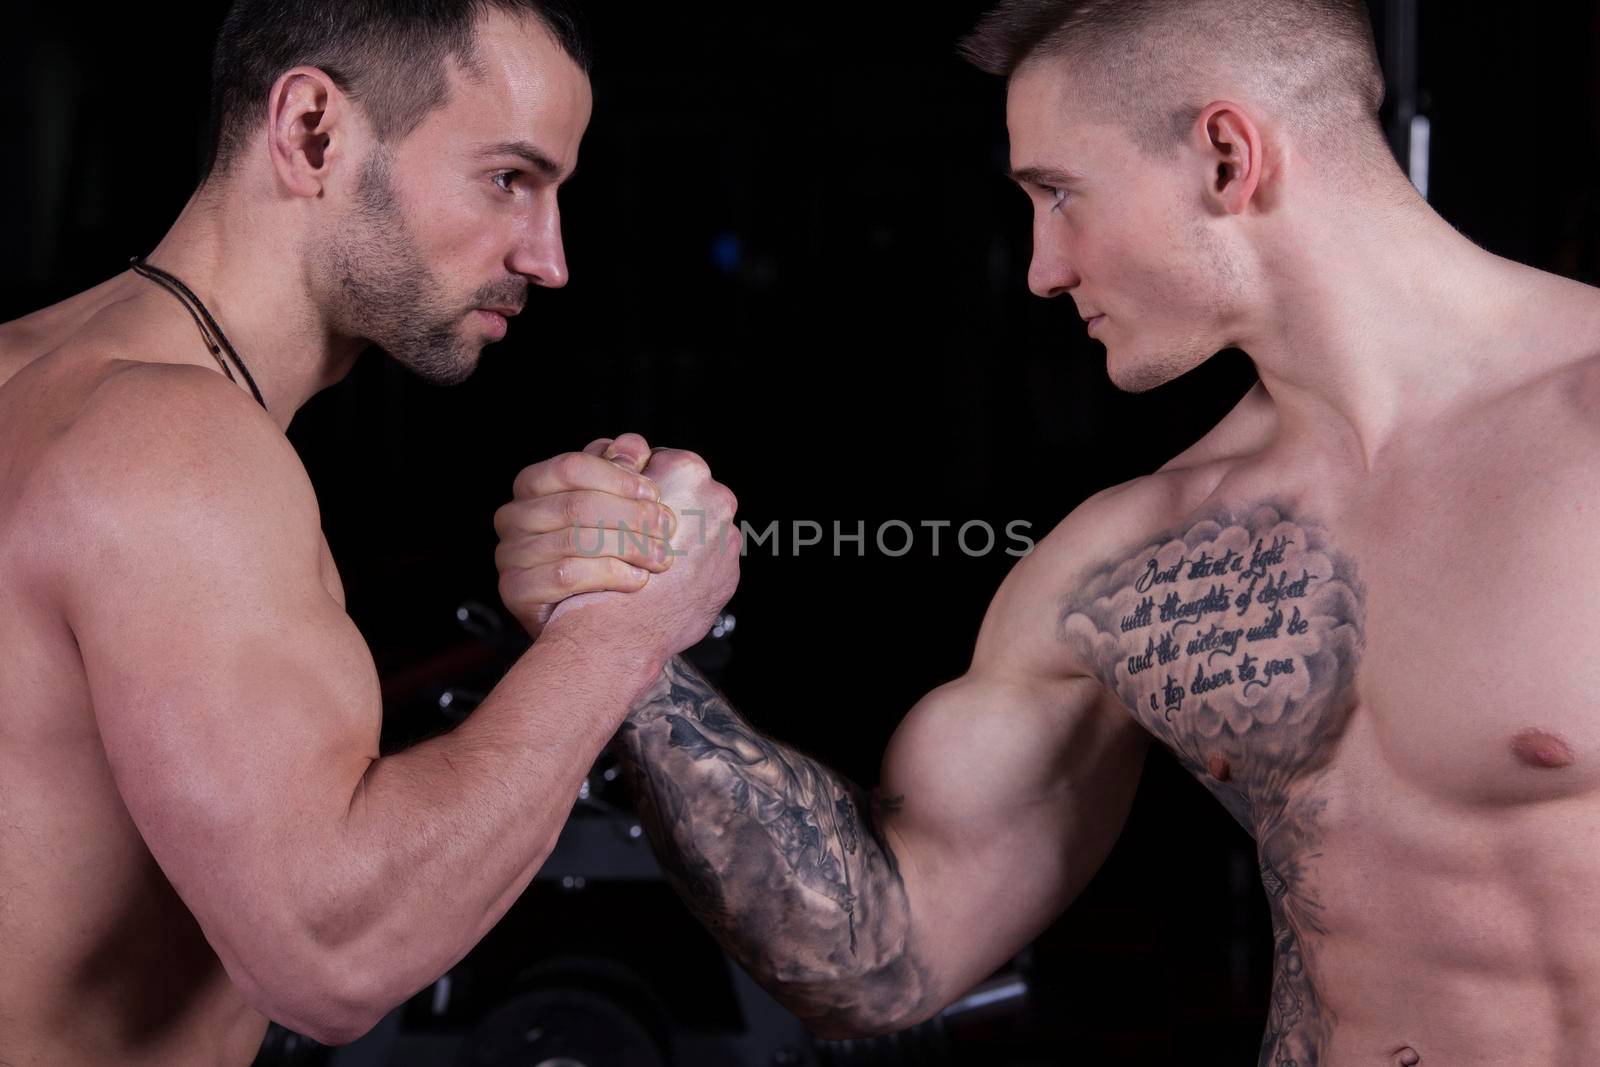 Arm wrestling. Two bodybuilders shake hands and look into each other's eyes